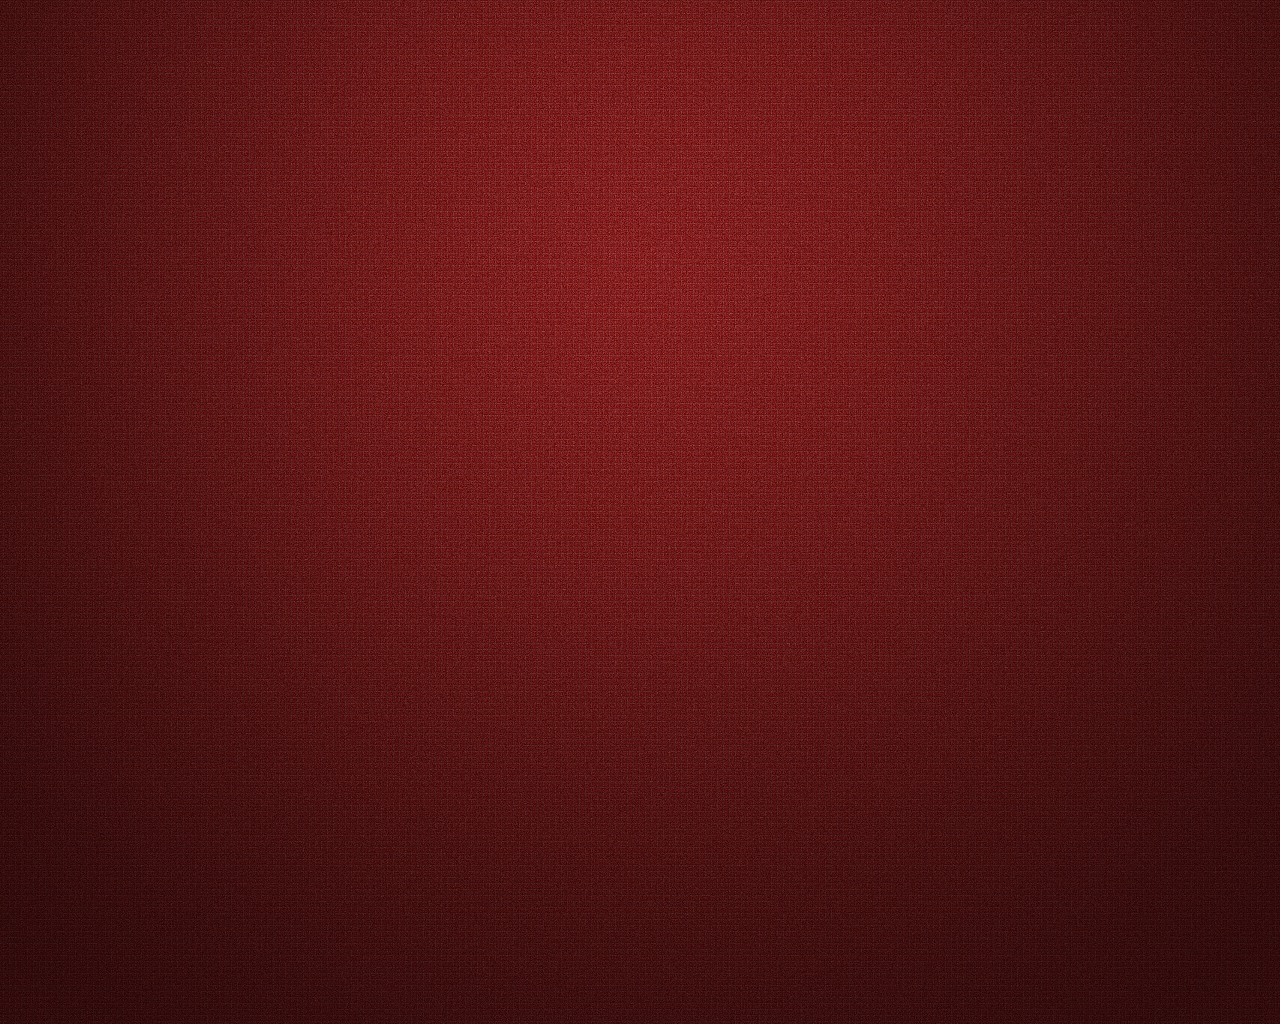 Full HD Wallpapers Backgrounds Red